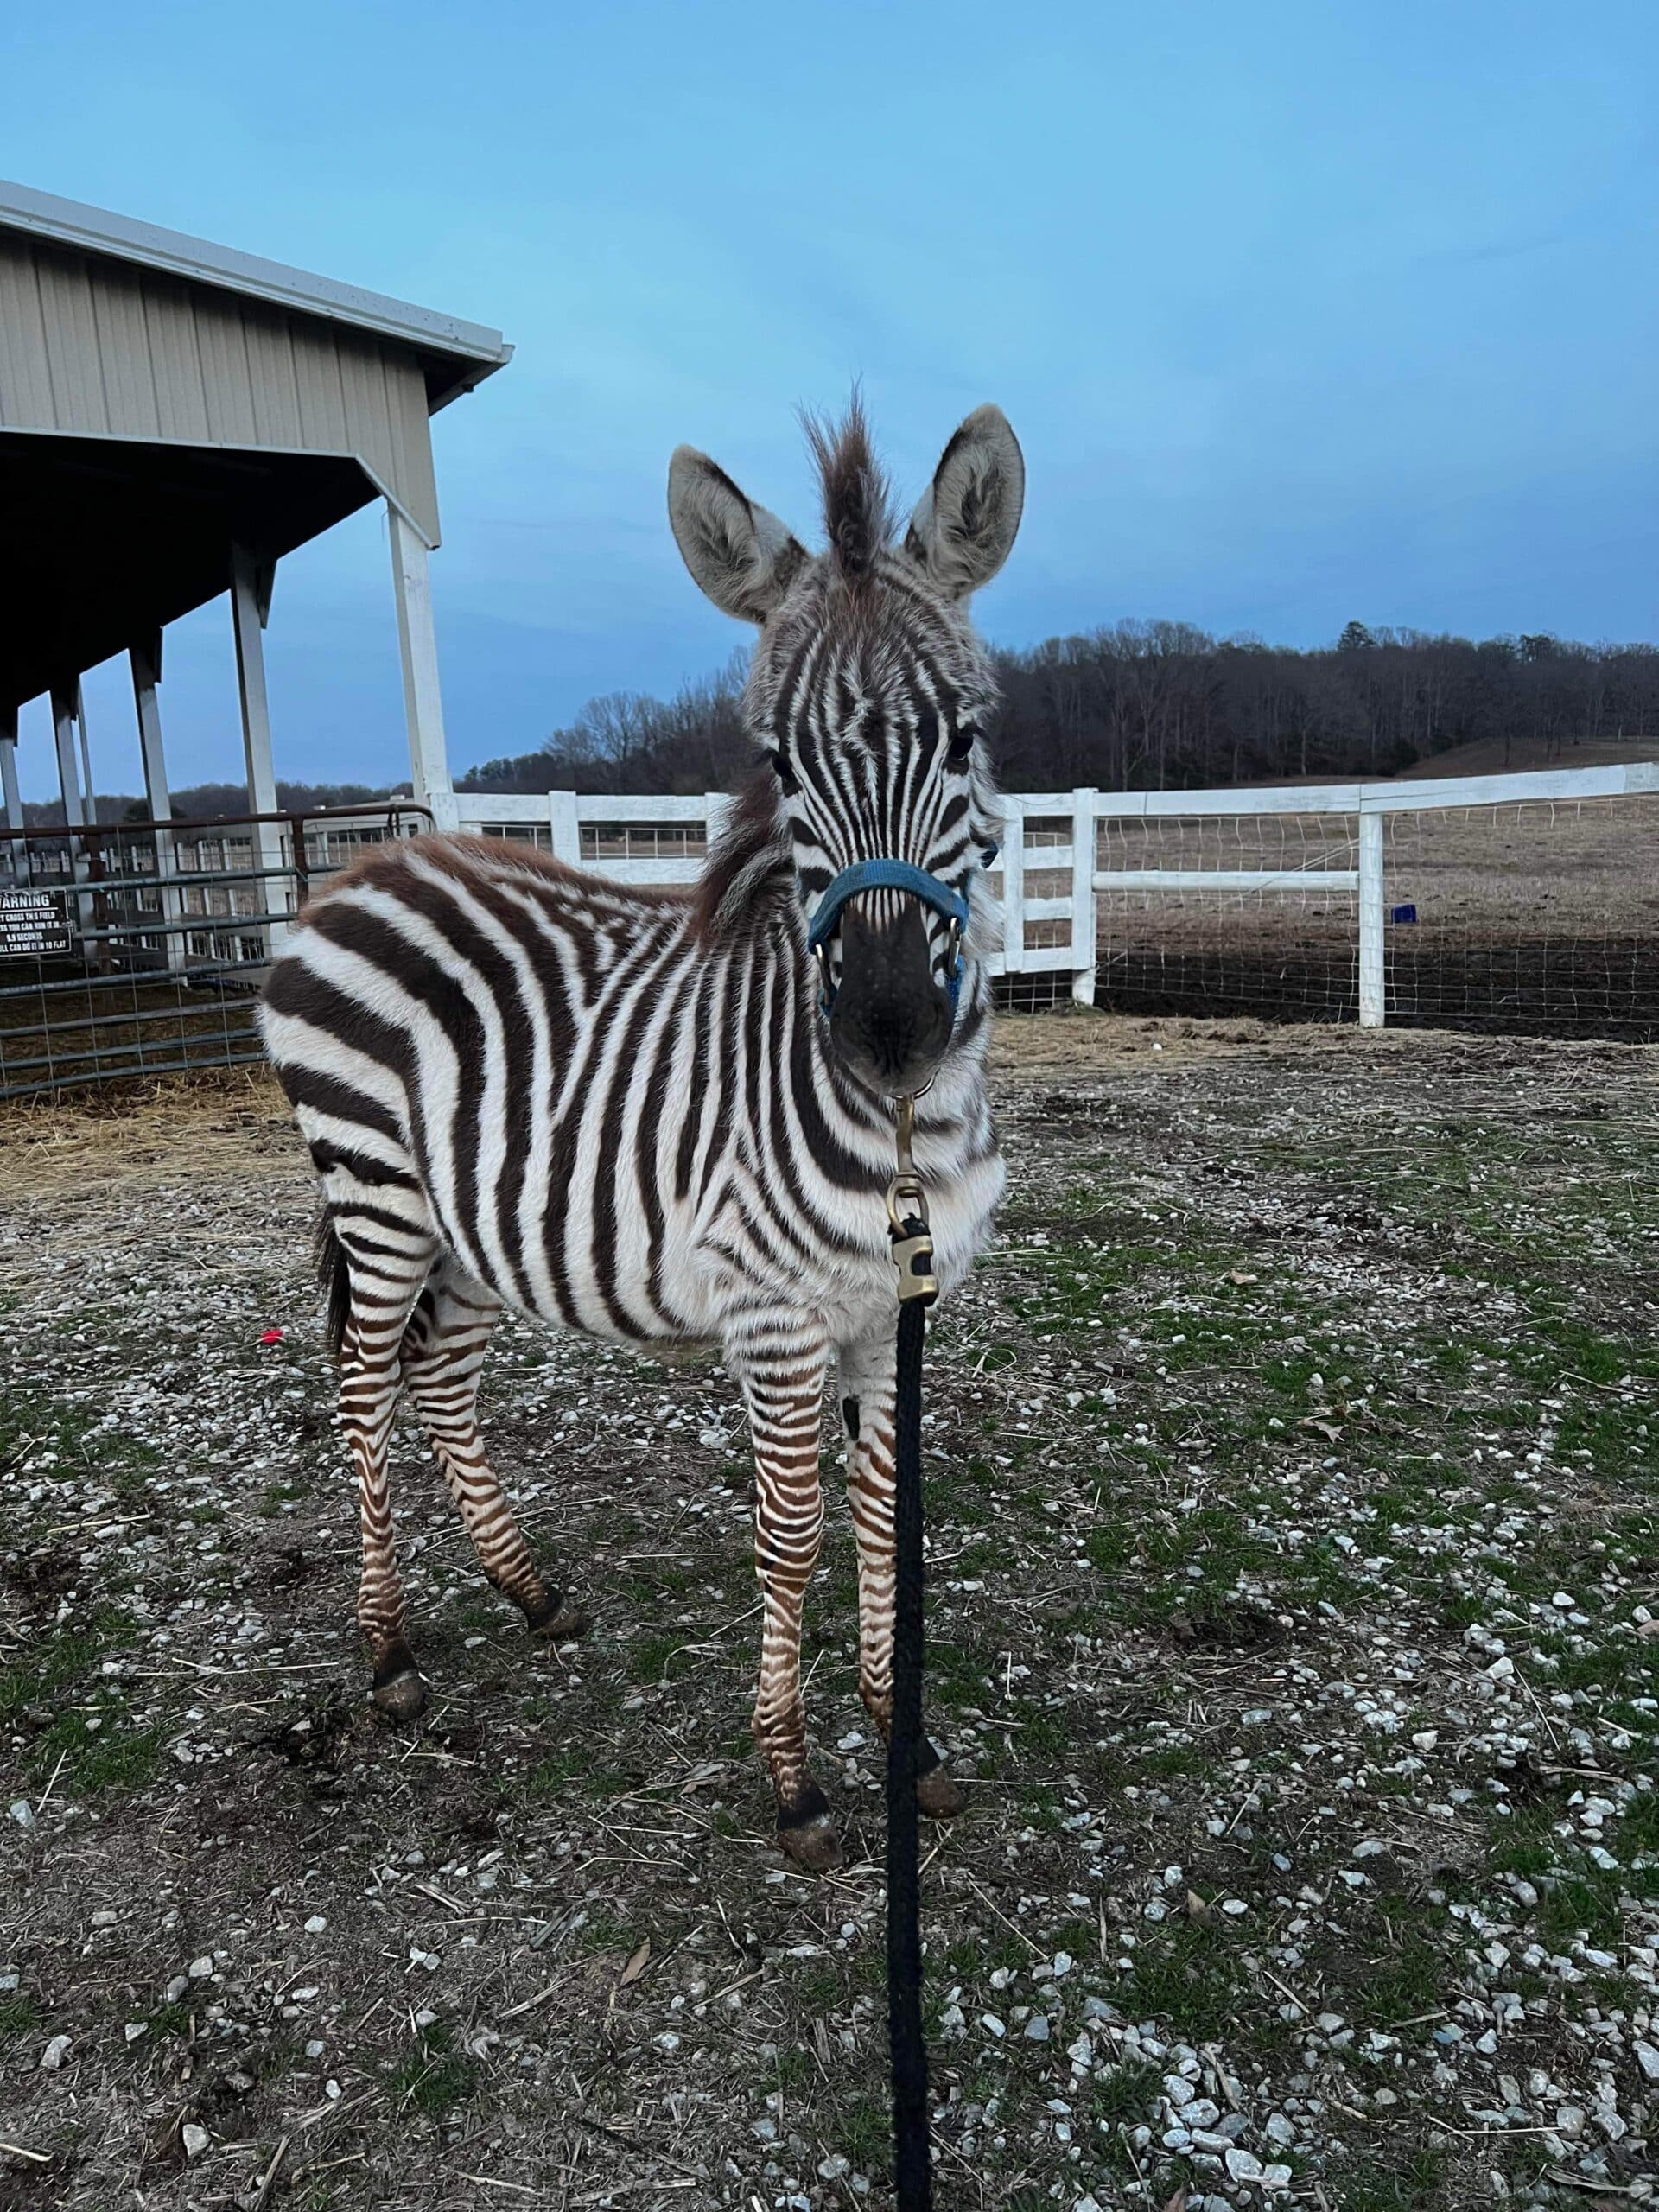 Zoey Zebra Filly 6 months old consigned ENDs 01/22 5pm EST - EWH